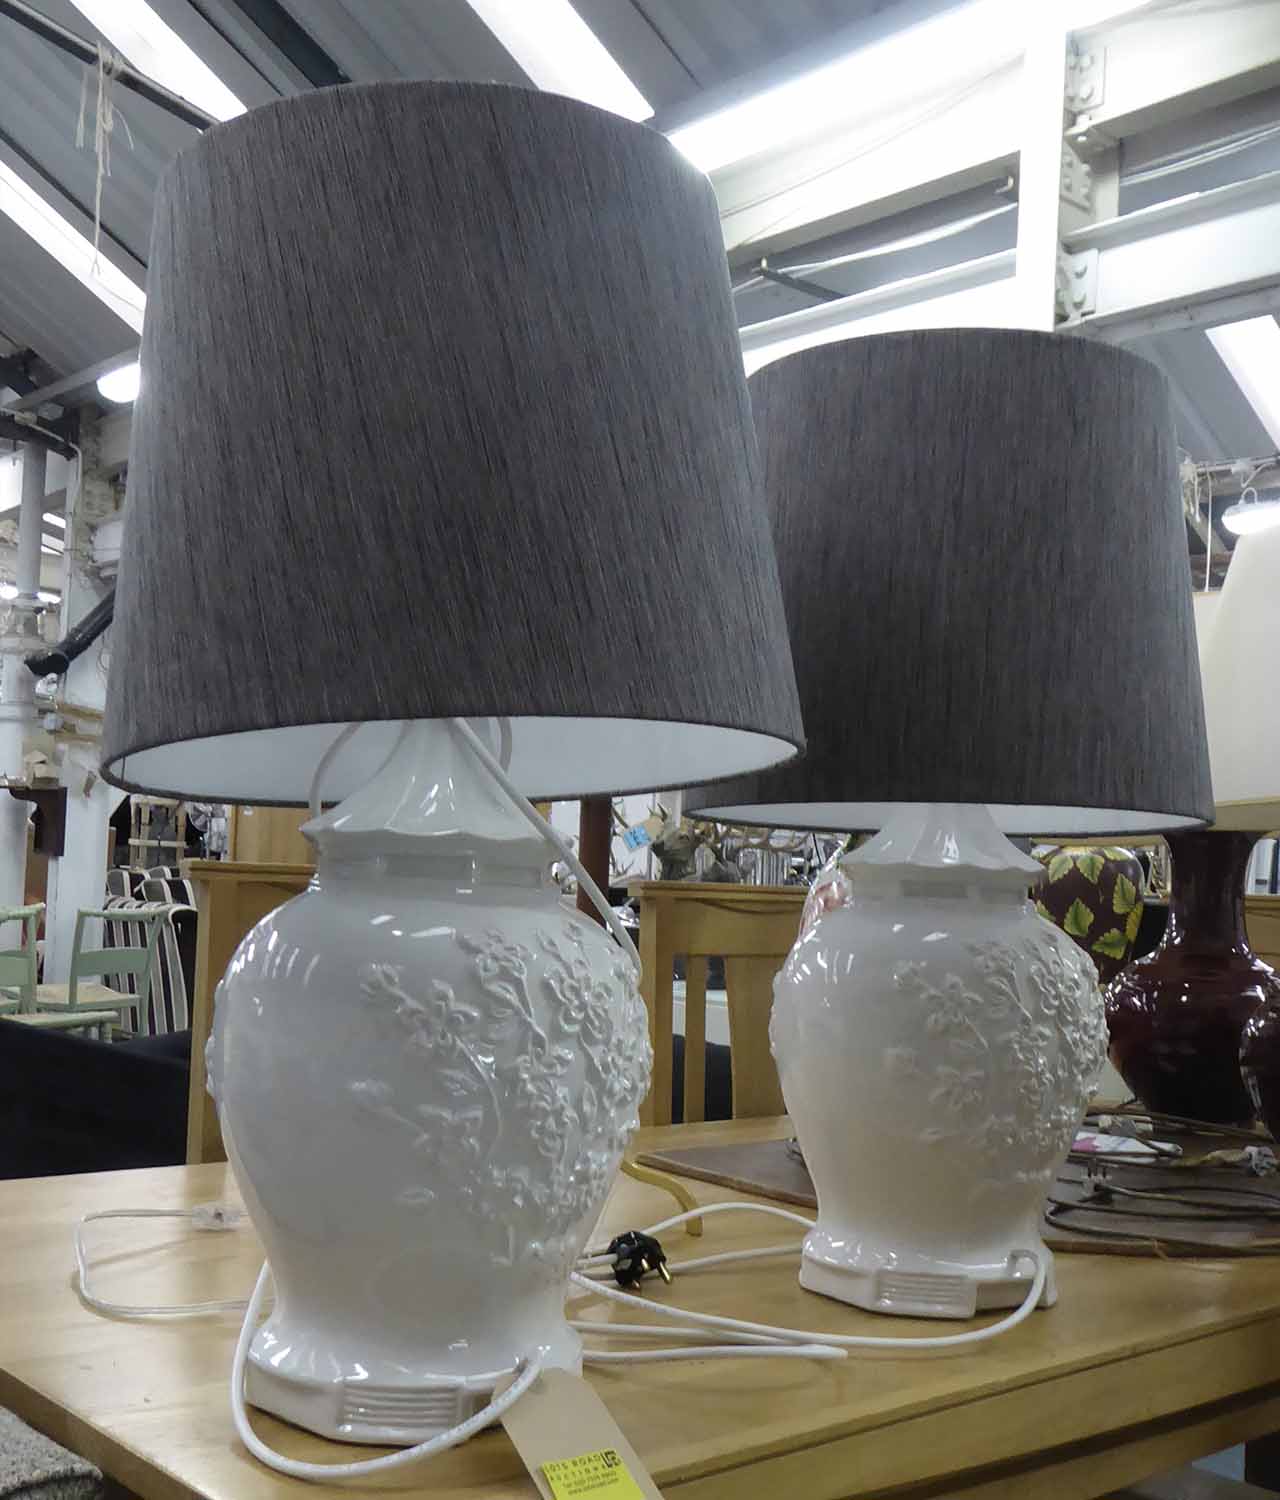 BLANC DE CHINE TABLE LAMPS, a pair, with shades, 69cm H.